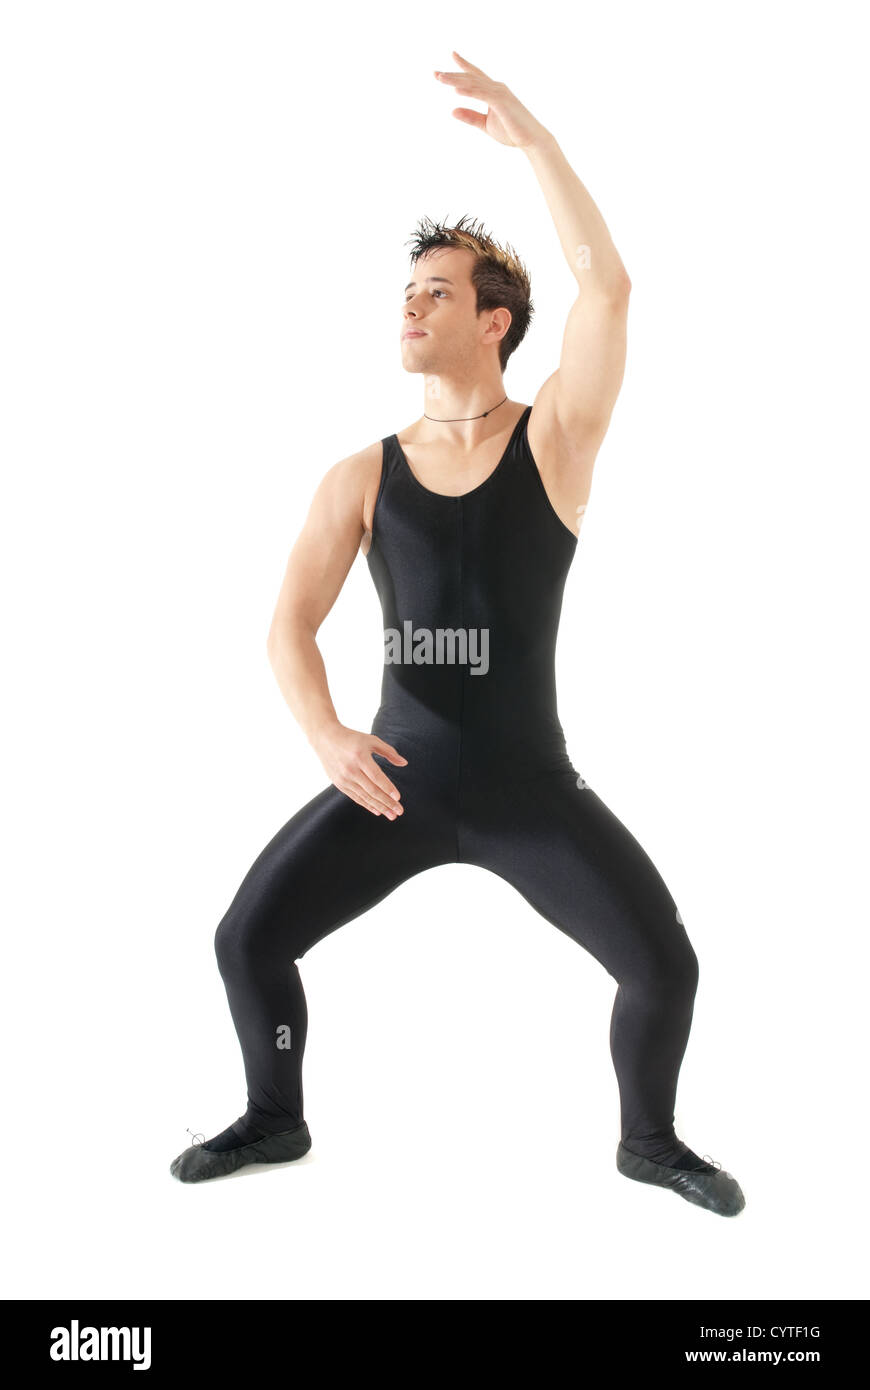 Young man dancing ballet isolated on white background, full lenght portrait. Stock Photo